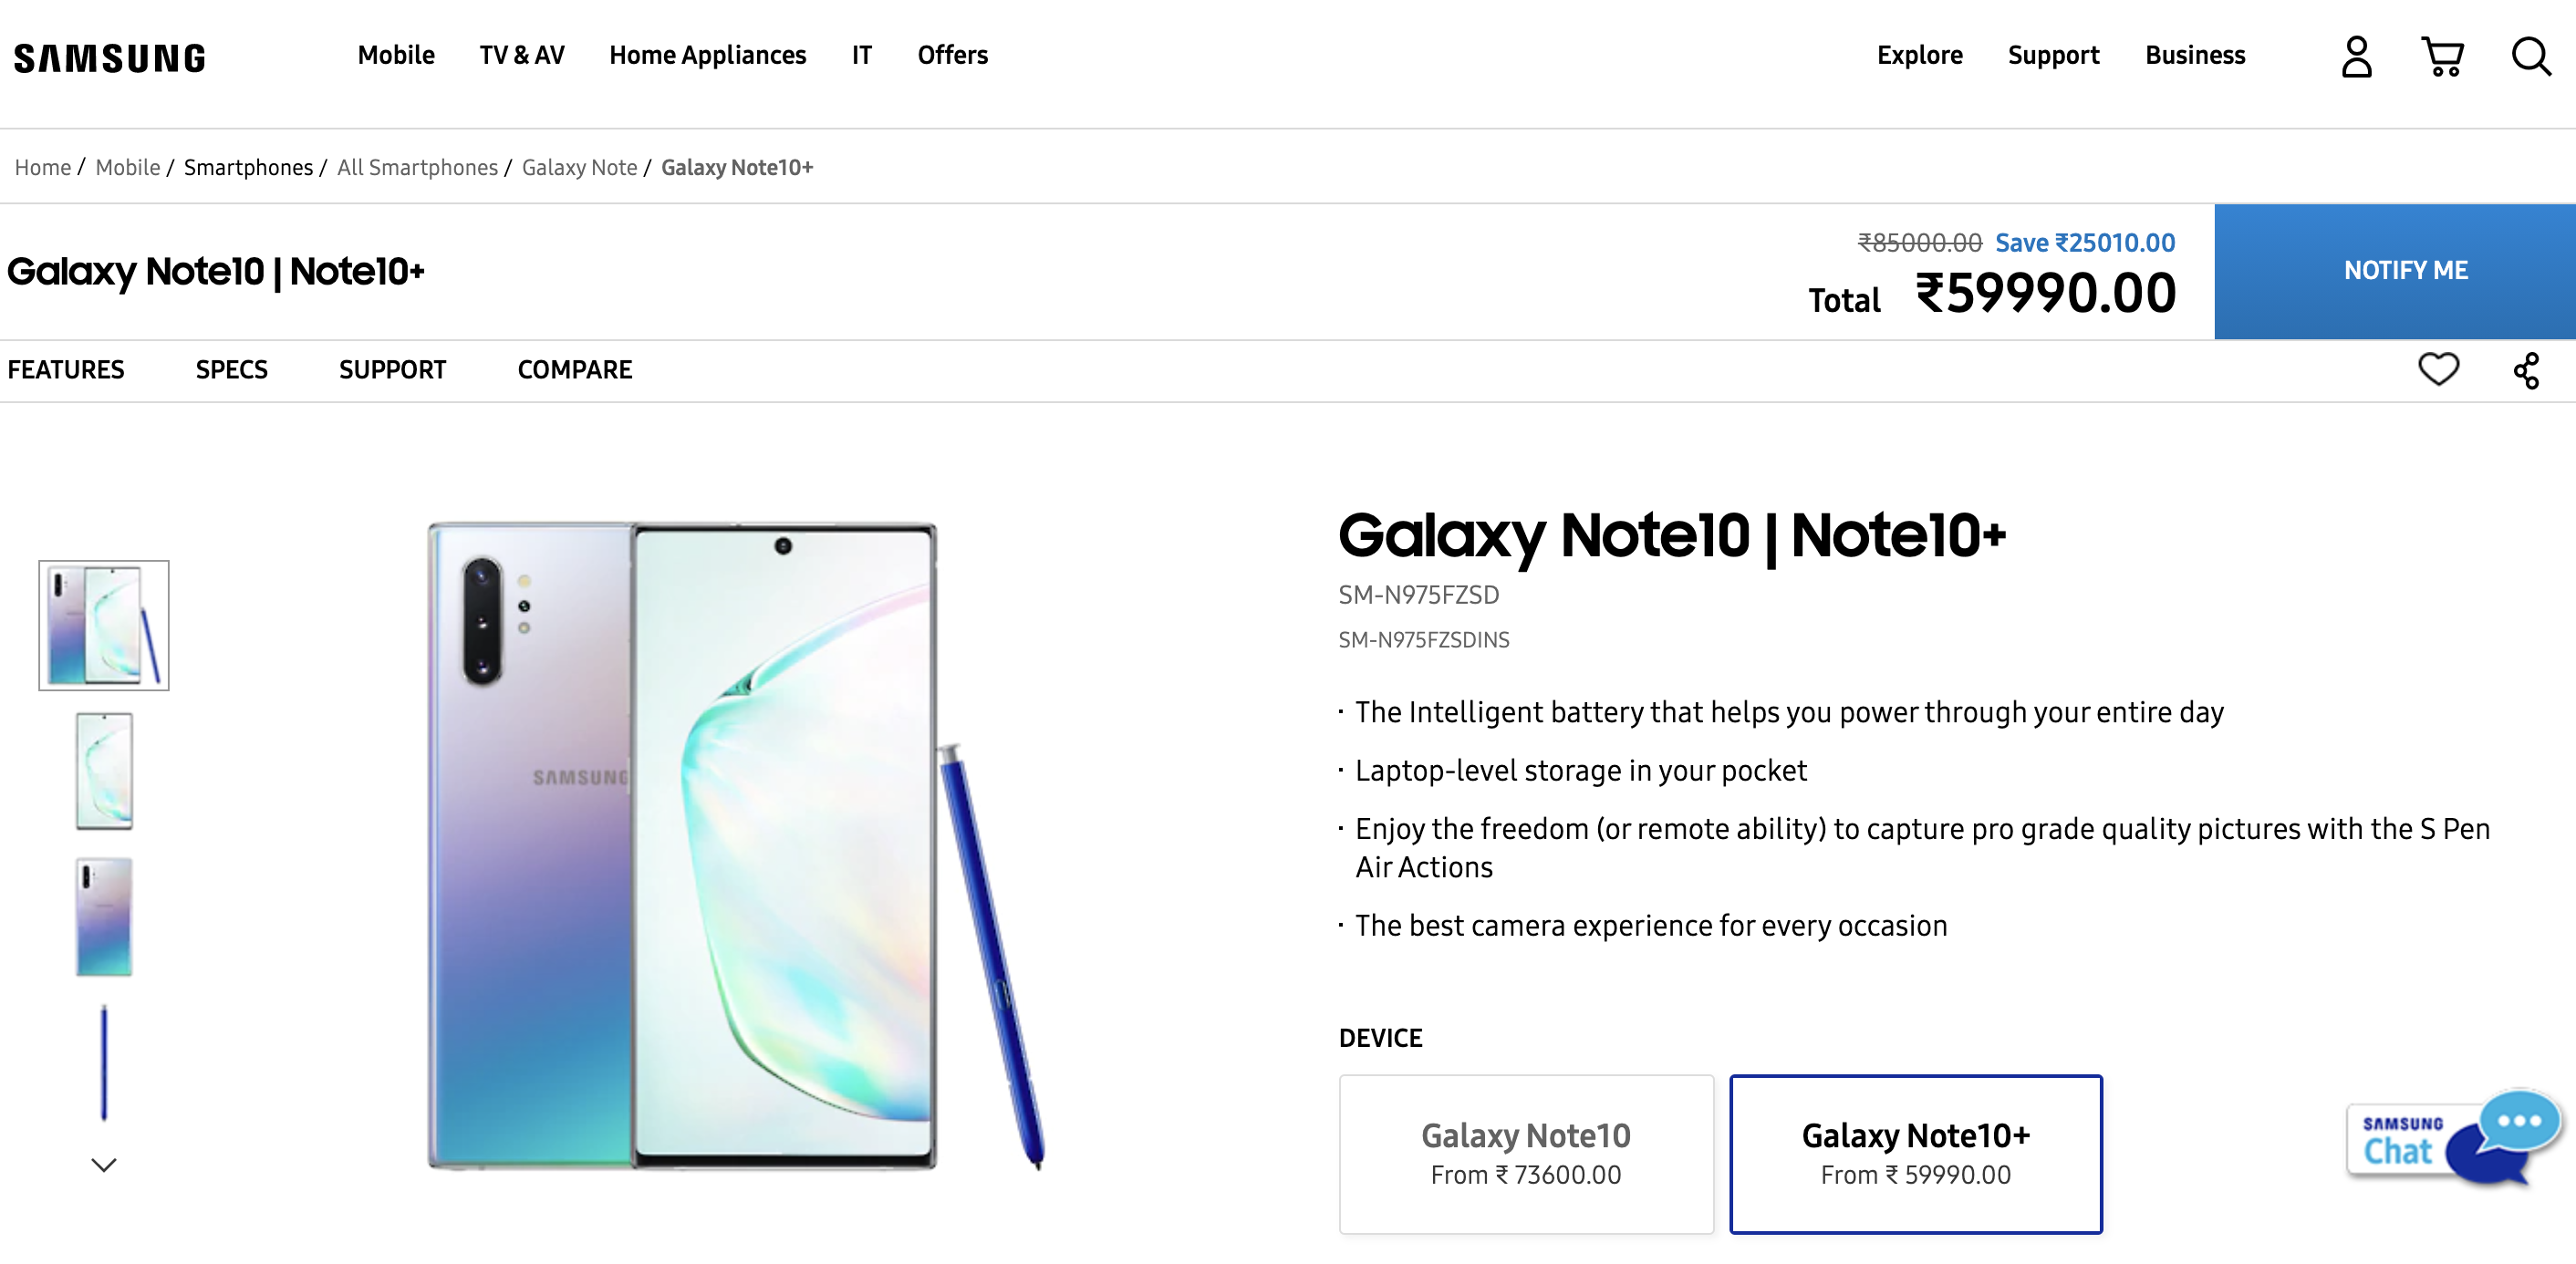 Samsung Galaxy Note10+ Price Dropped